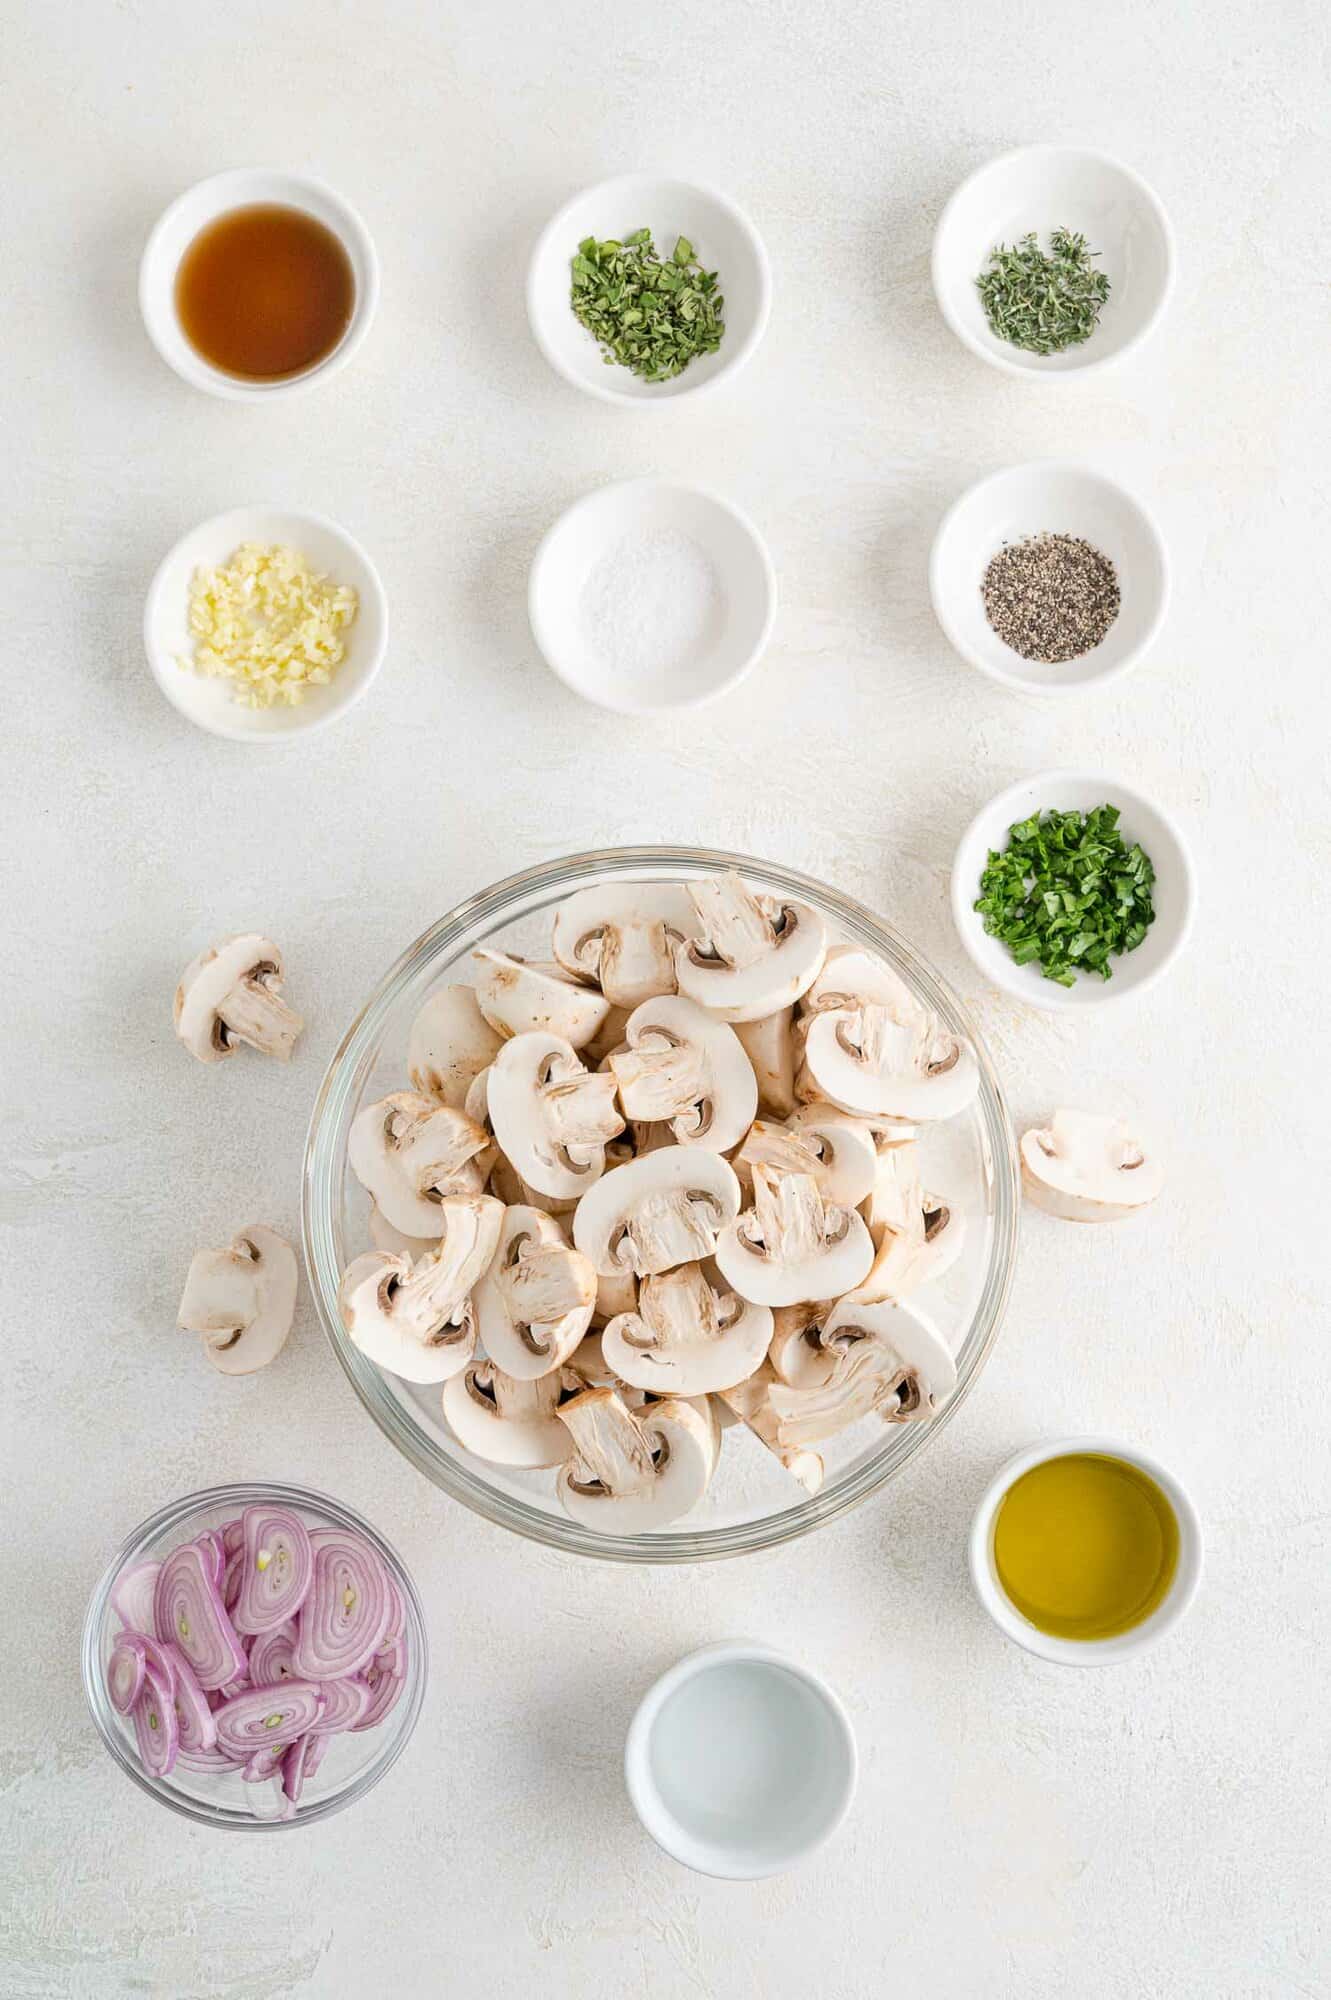 Ingredients needed for recipe, including fresh mushrooms.